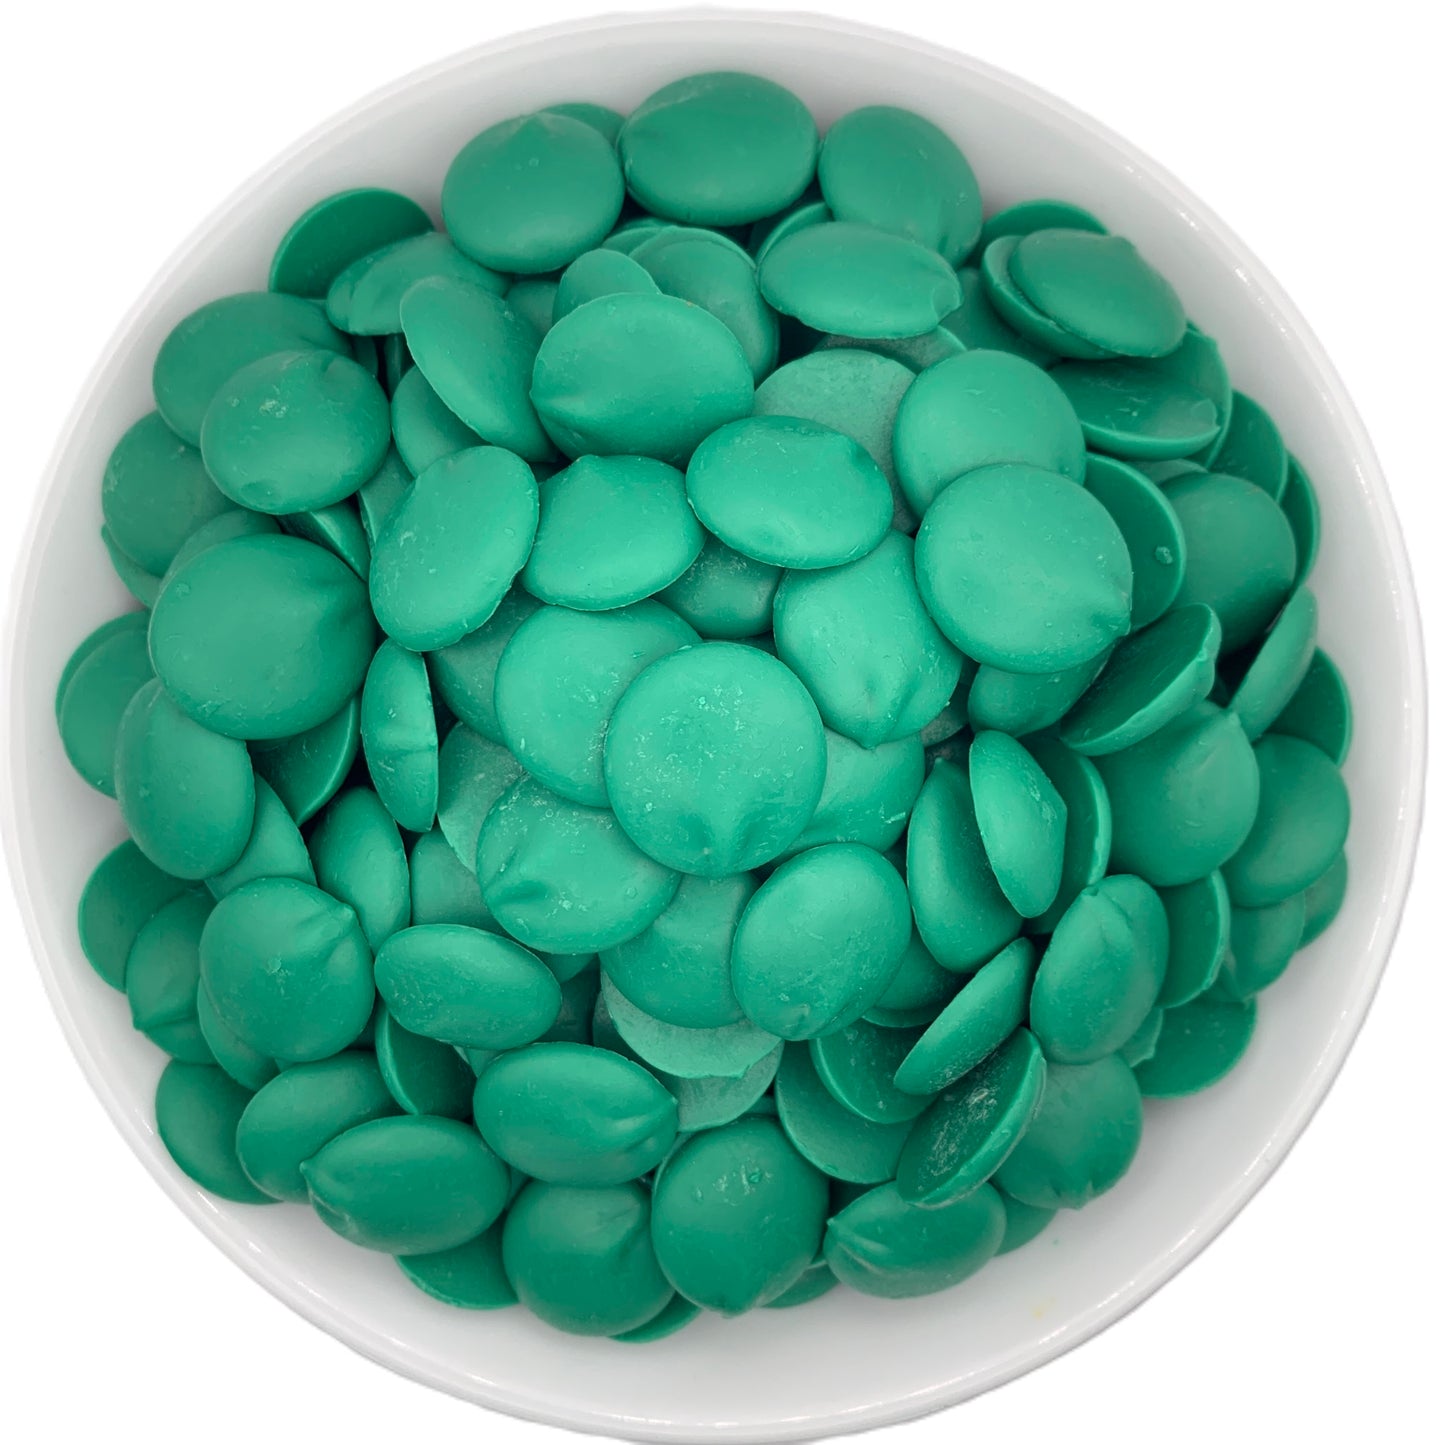 Top view of a white bowl full of Merckens dark green chocolate melting wafers, showcasing the vibrant green color perfect for themed desserts and festive treats.